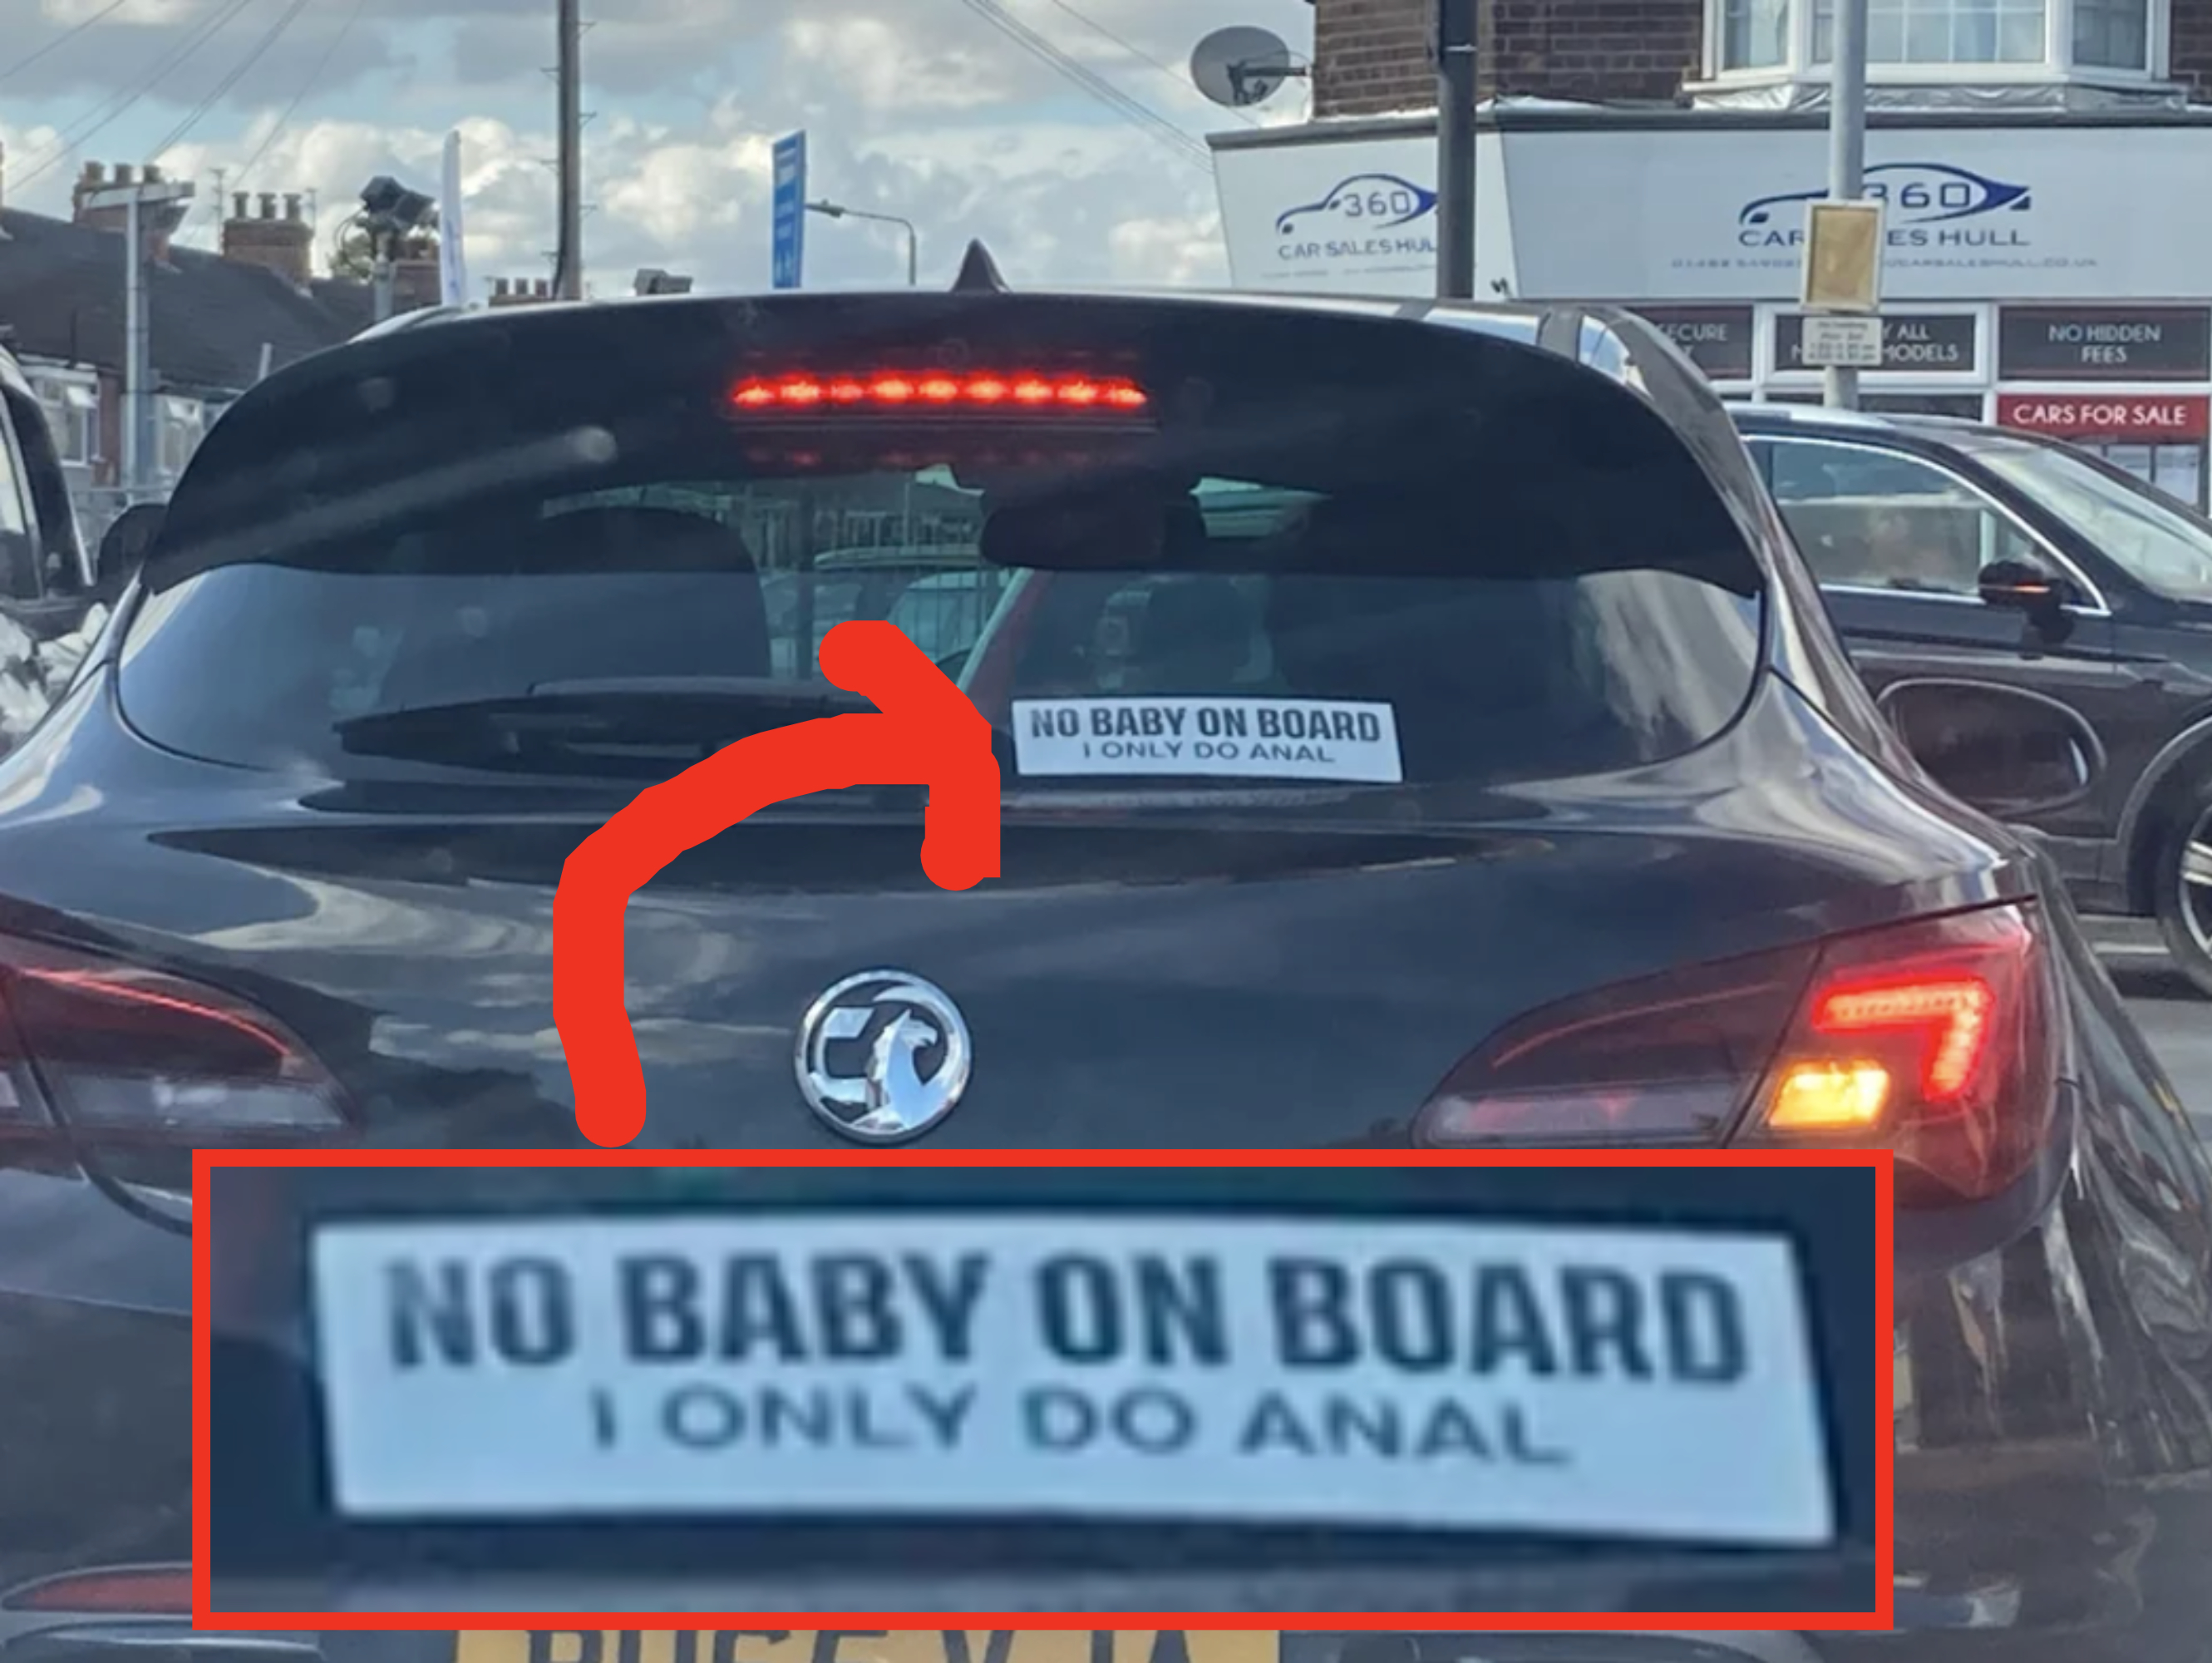 &quot;No baby on board, I only do anal&quot;